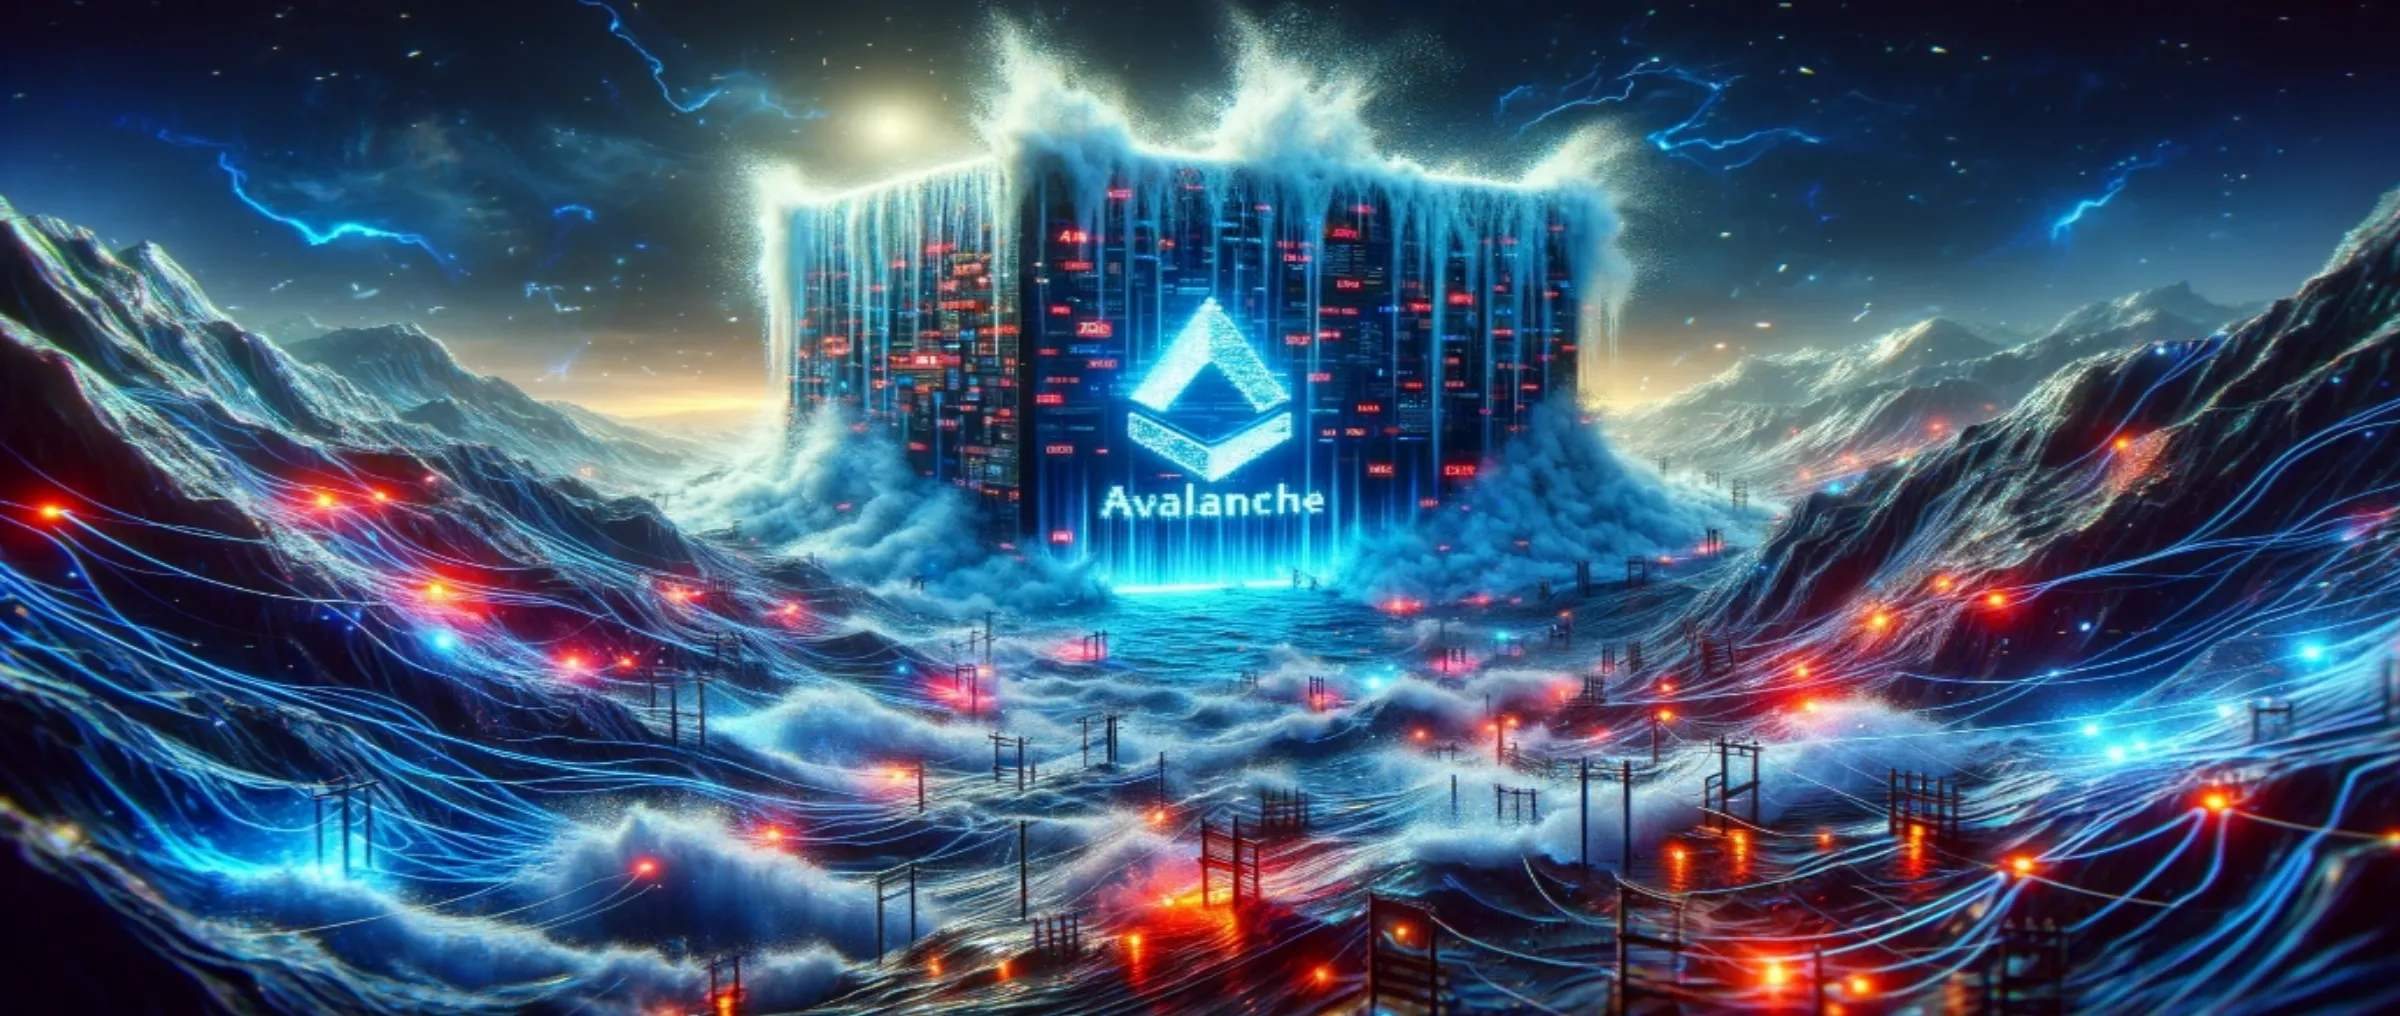 The influx of ordinals caused a glitch in the Avalanche blockchain